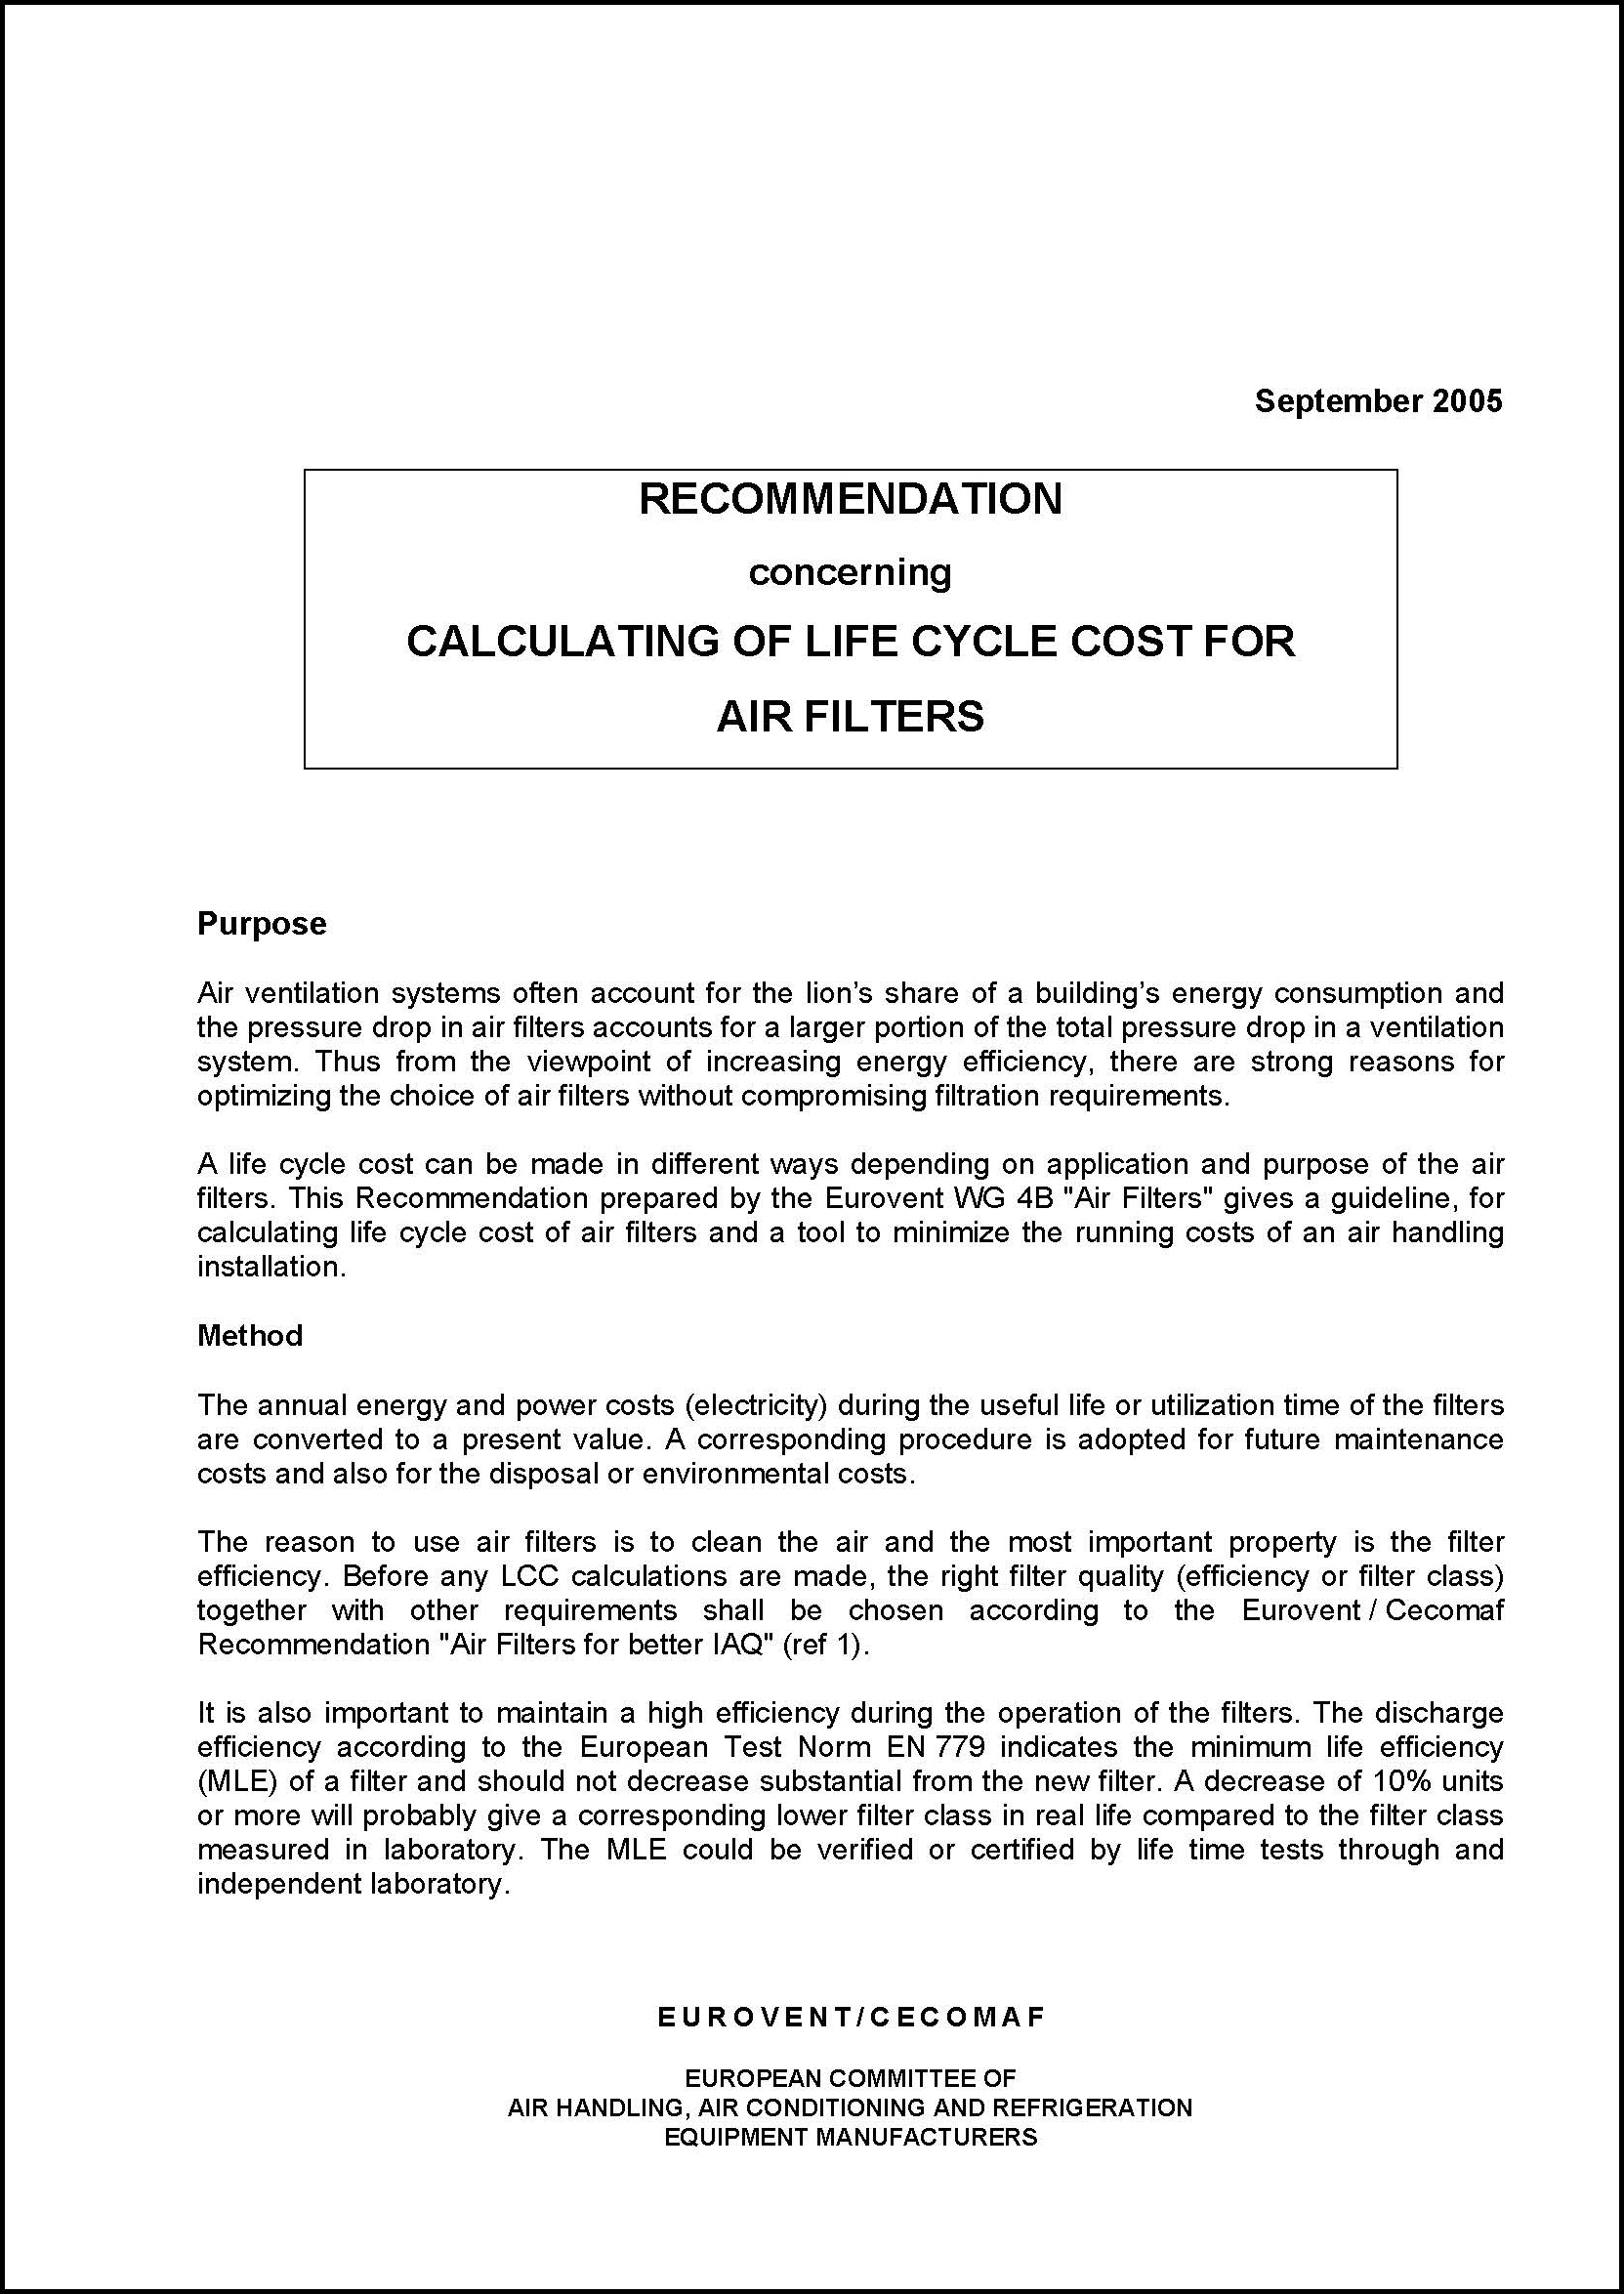 Eurovent 4/10 - 2005: Calculating of life cycle cost for air filters